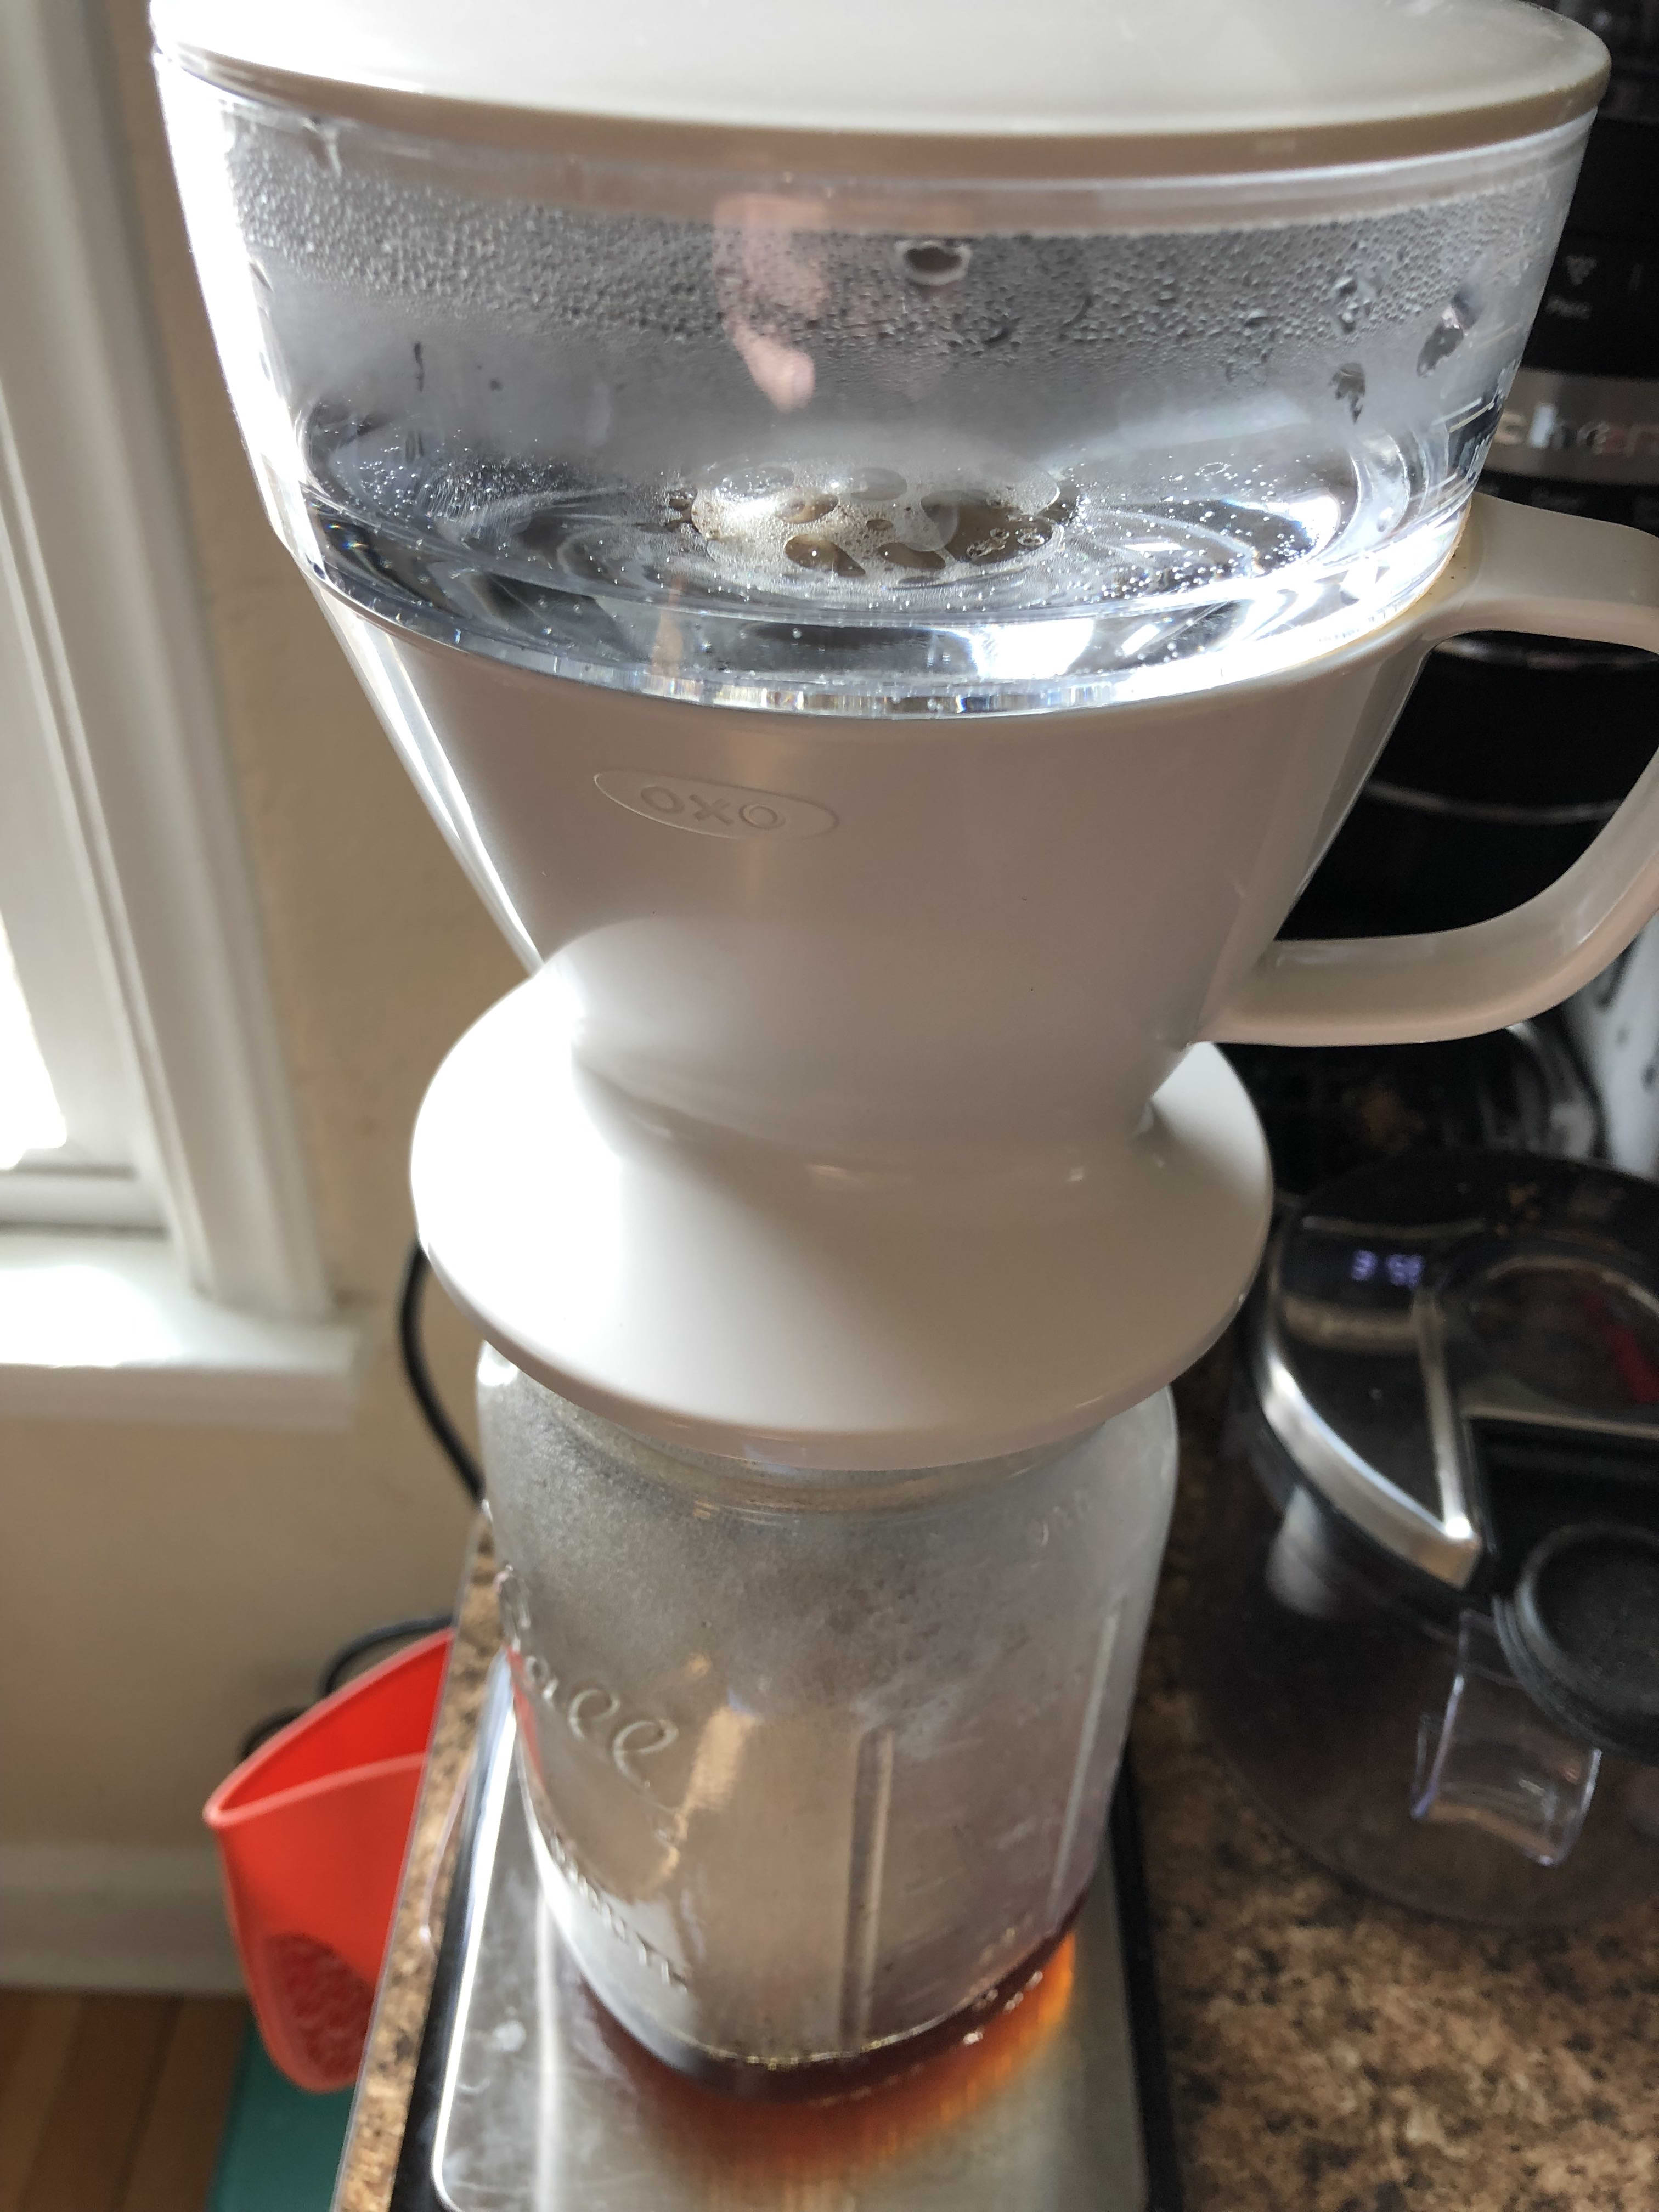 https://cdn.apartmenttherapy.info/image/upload/v1657909892/k/Photo/Lifestyle/07-2022-BestListPourOver/Oxo_Pour_Over_-_Shot_of_the_water_tank.jpg